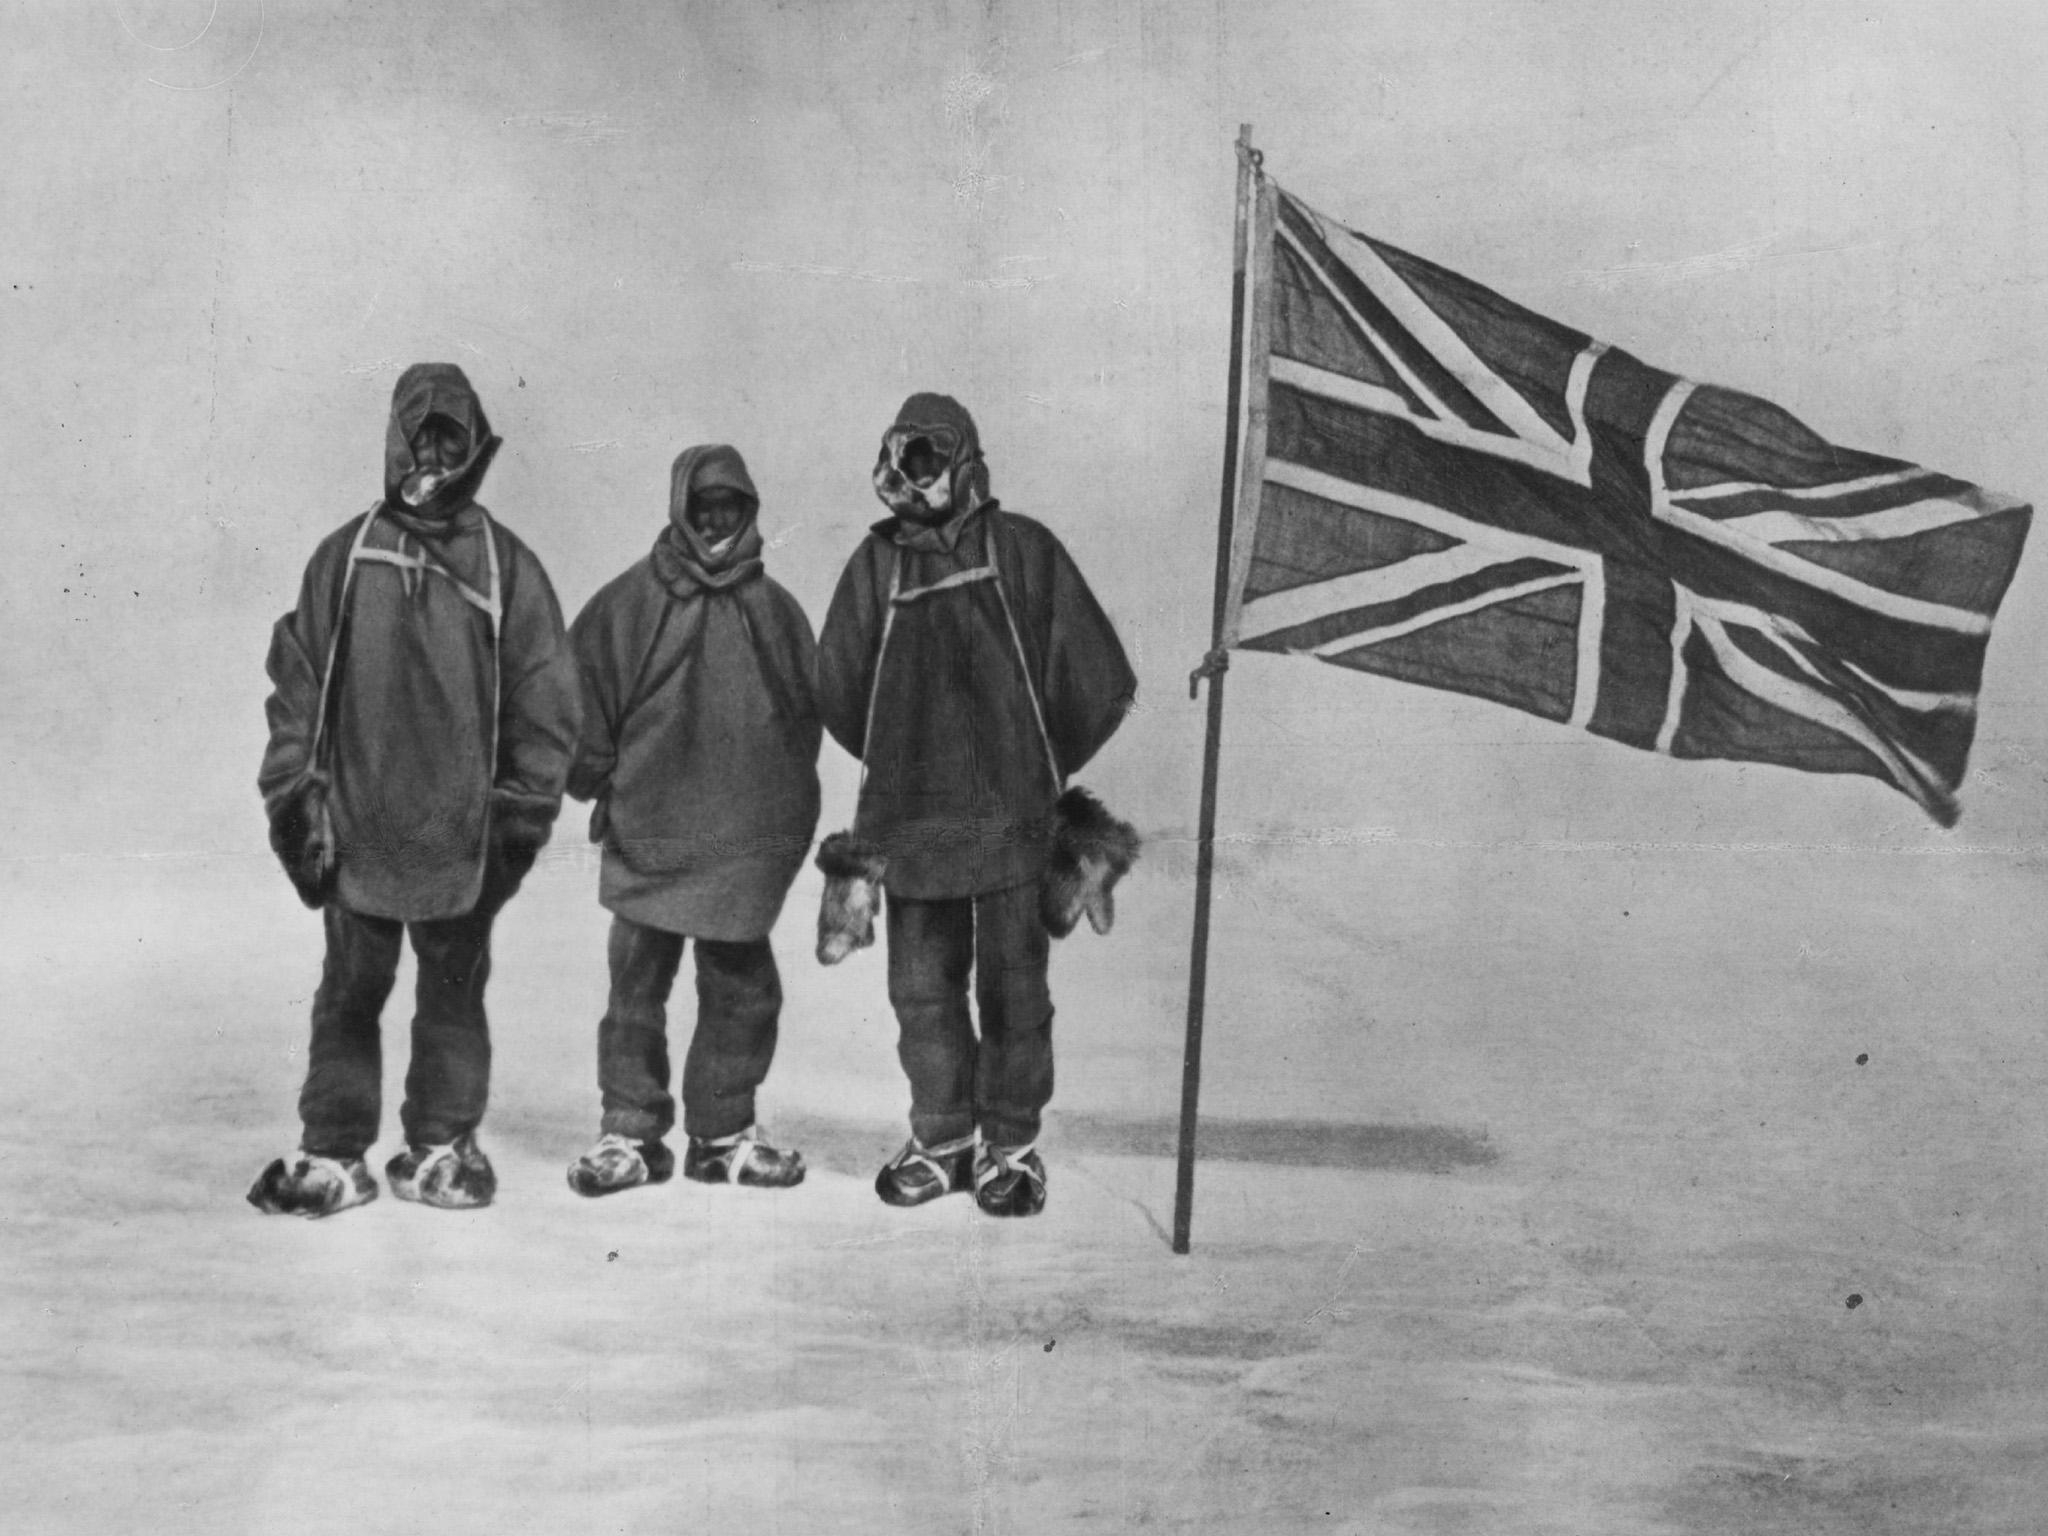 Sir Ernest Henry Shackleton and two members of his expedition team beside a Union Jack within 111 miles of the South Pole, a record feat